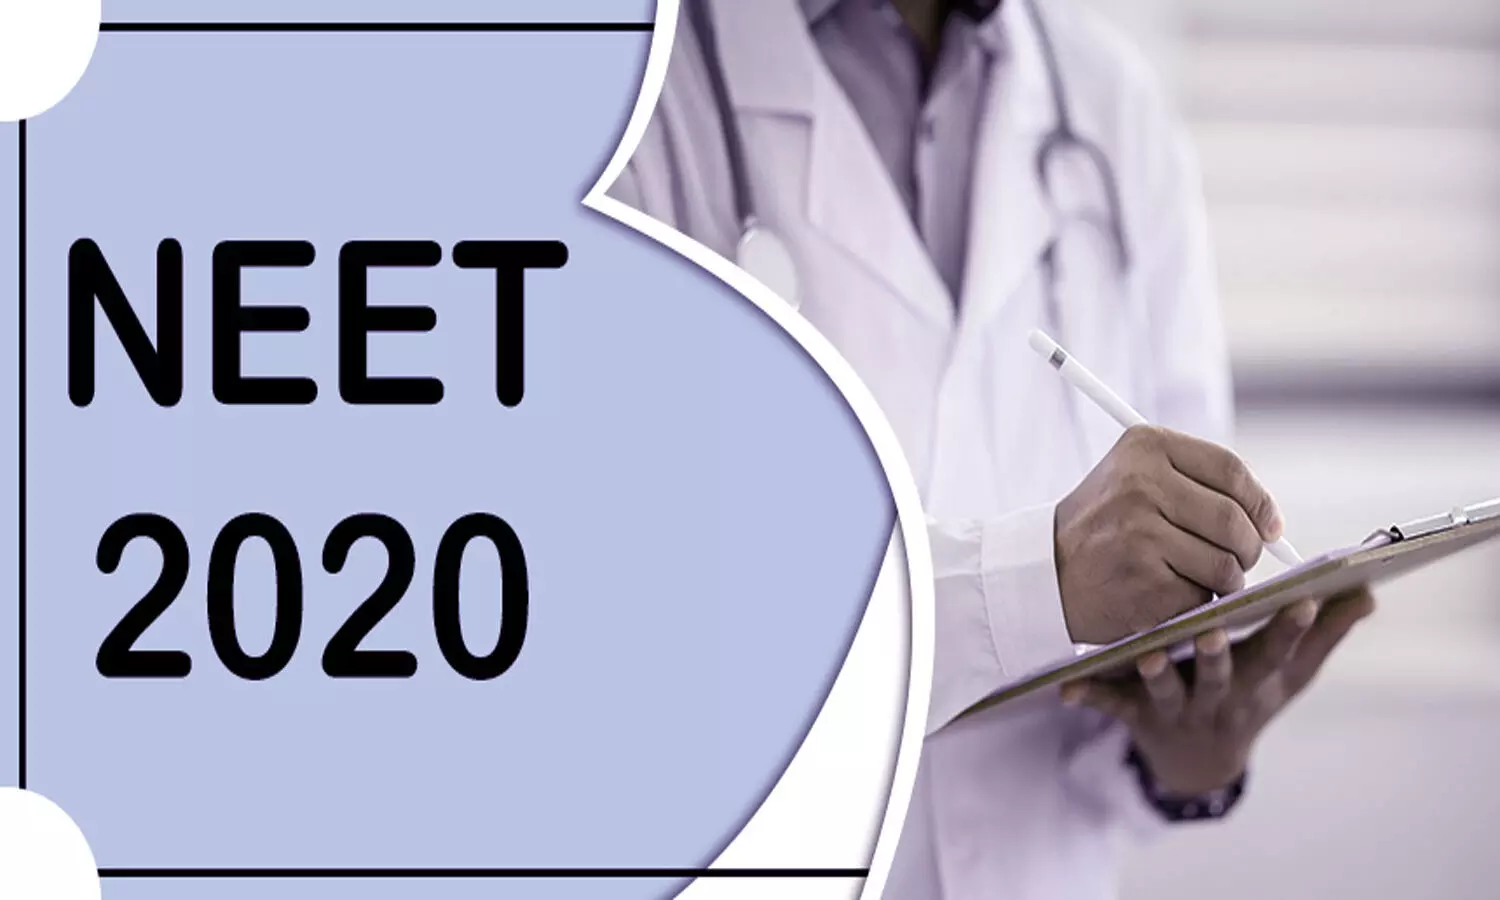 NEET 2020 Results: Check out Analysis, Percentile Cut-offs